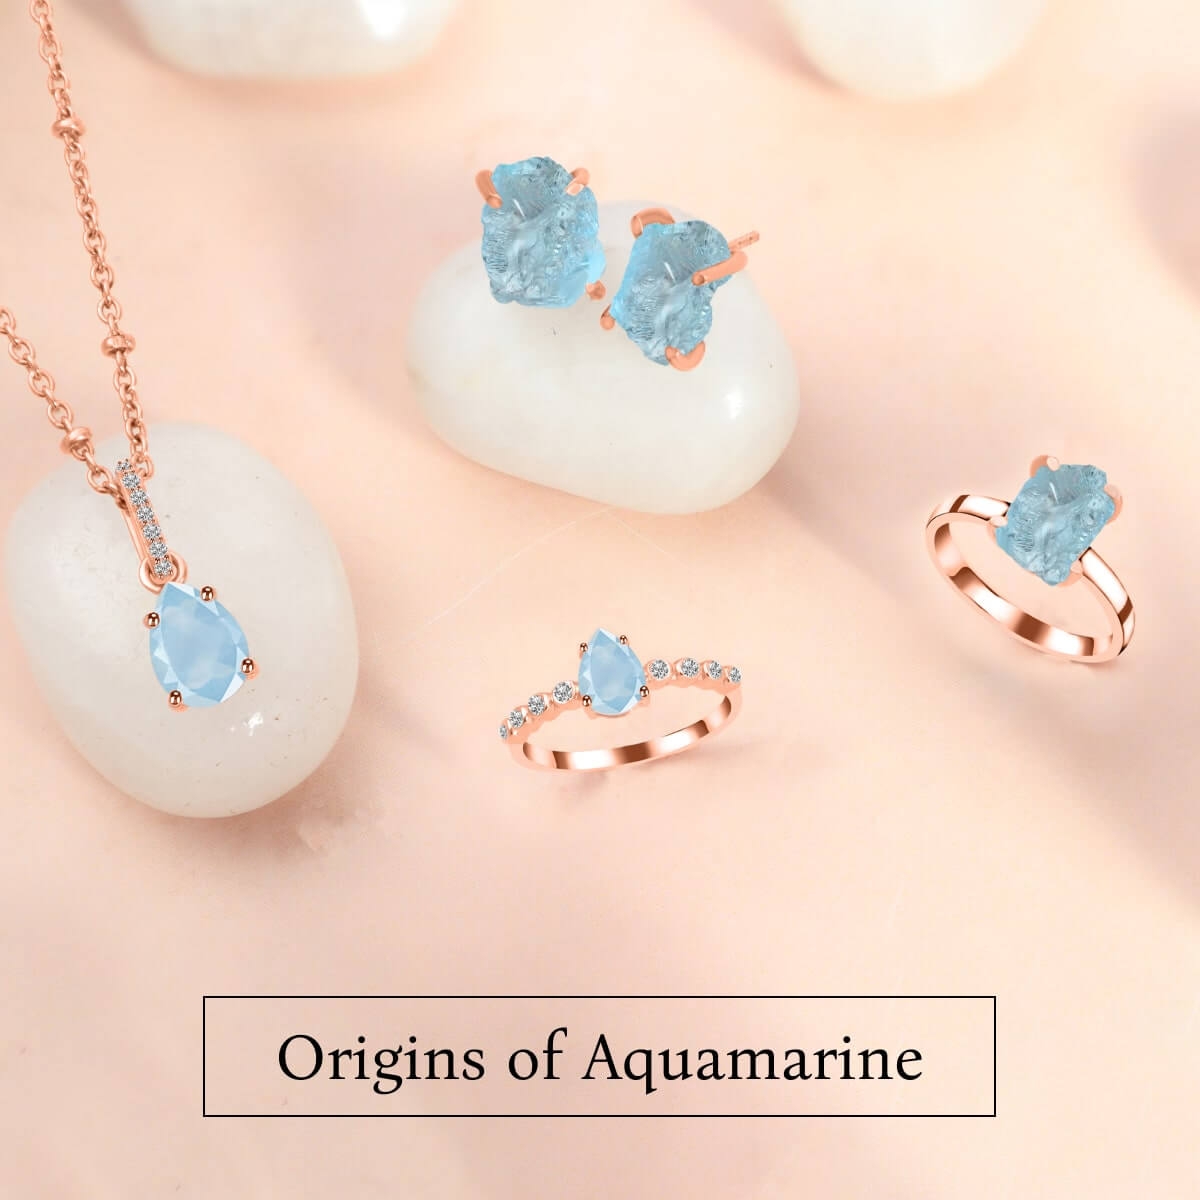 Buy Ratnagarbha Aquamarine Briolette Necklace, March Birthstone Necklace,  Blue Drops Necklace, Aquamarine Drops Necklace, Aquamarine Earrings,  Sterling Silver Jewelry, Throat Chakra Necklace at Amazon.in